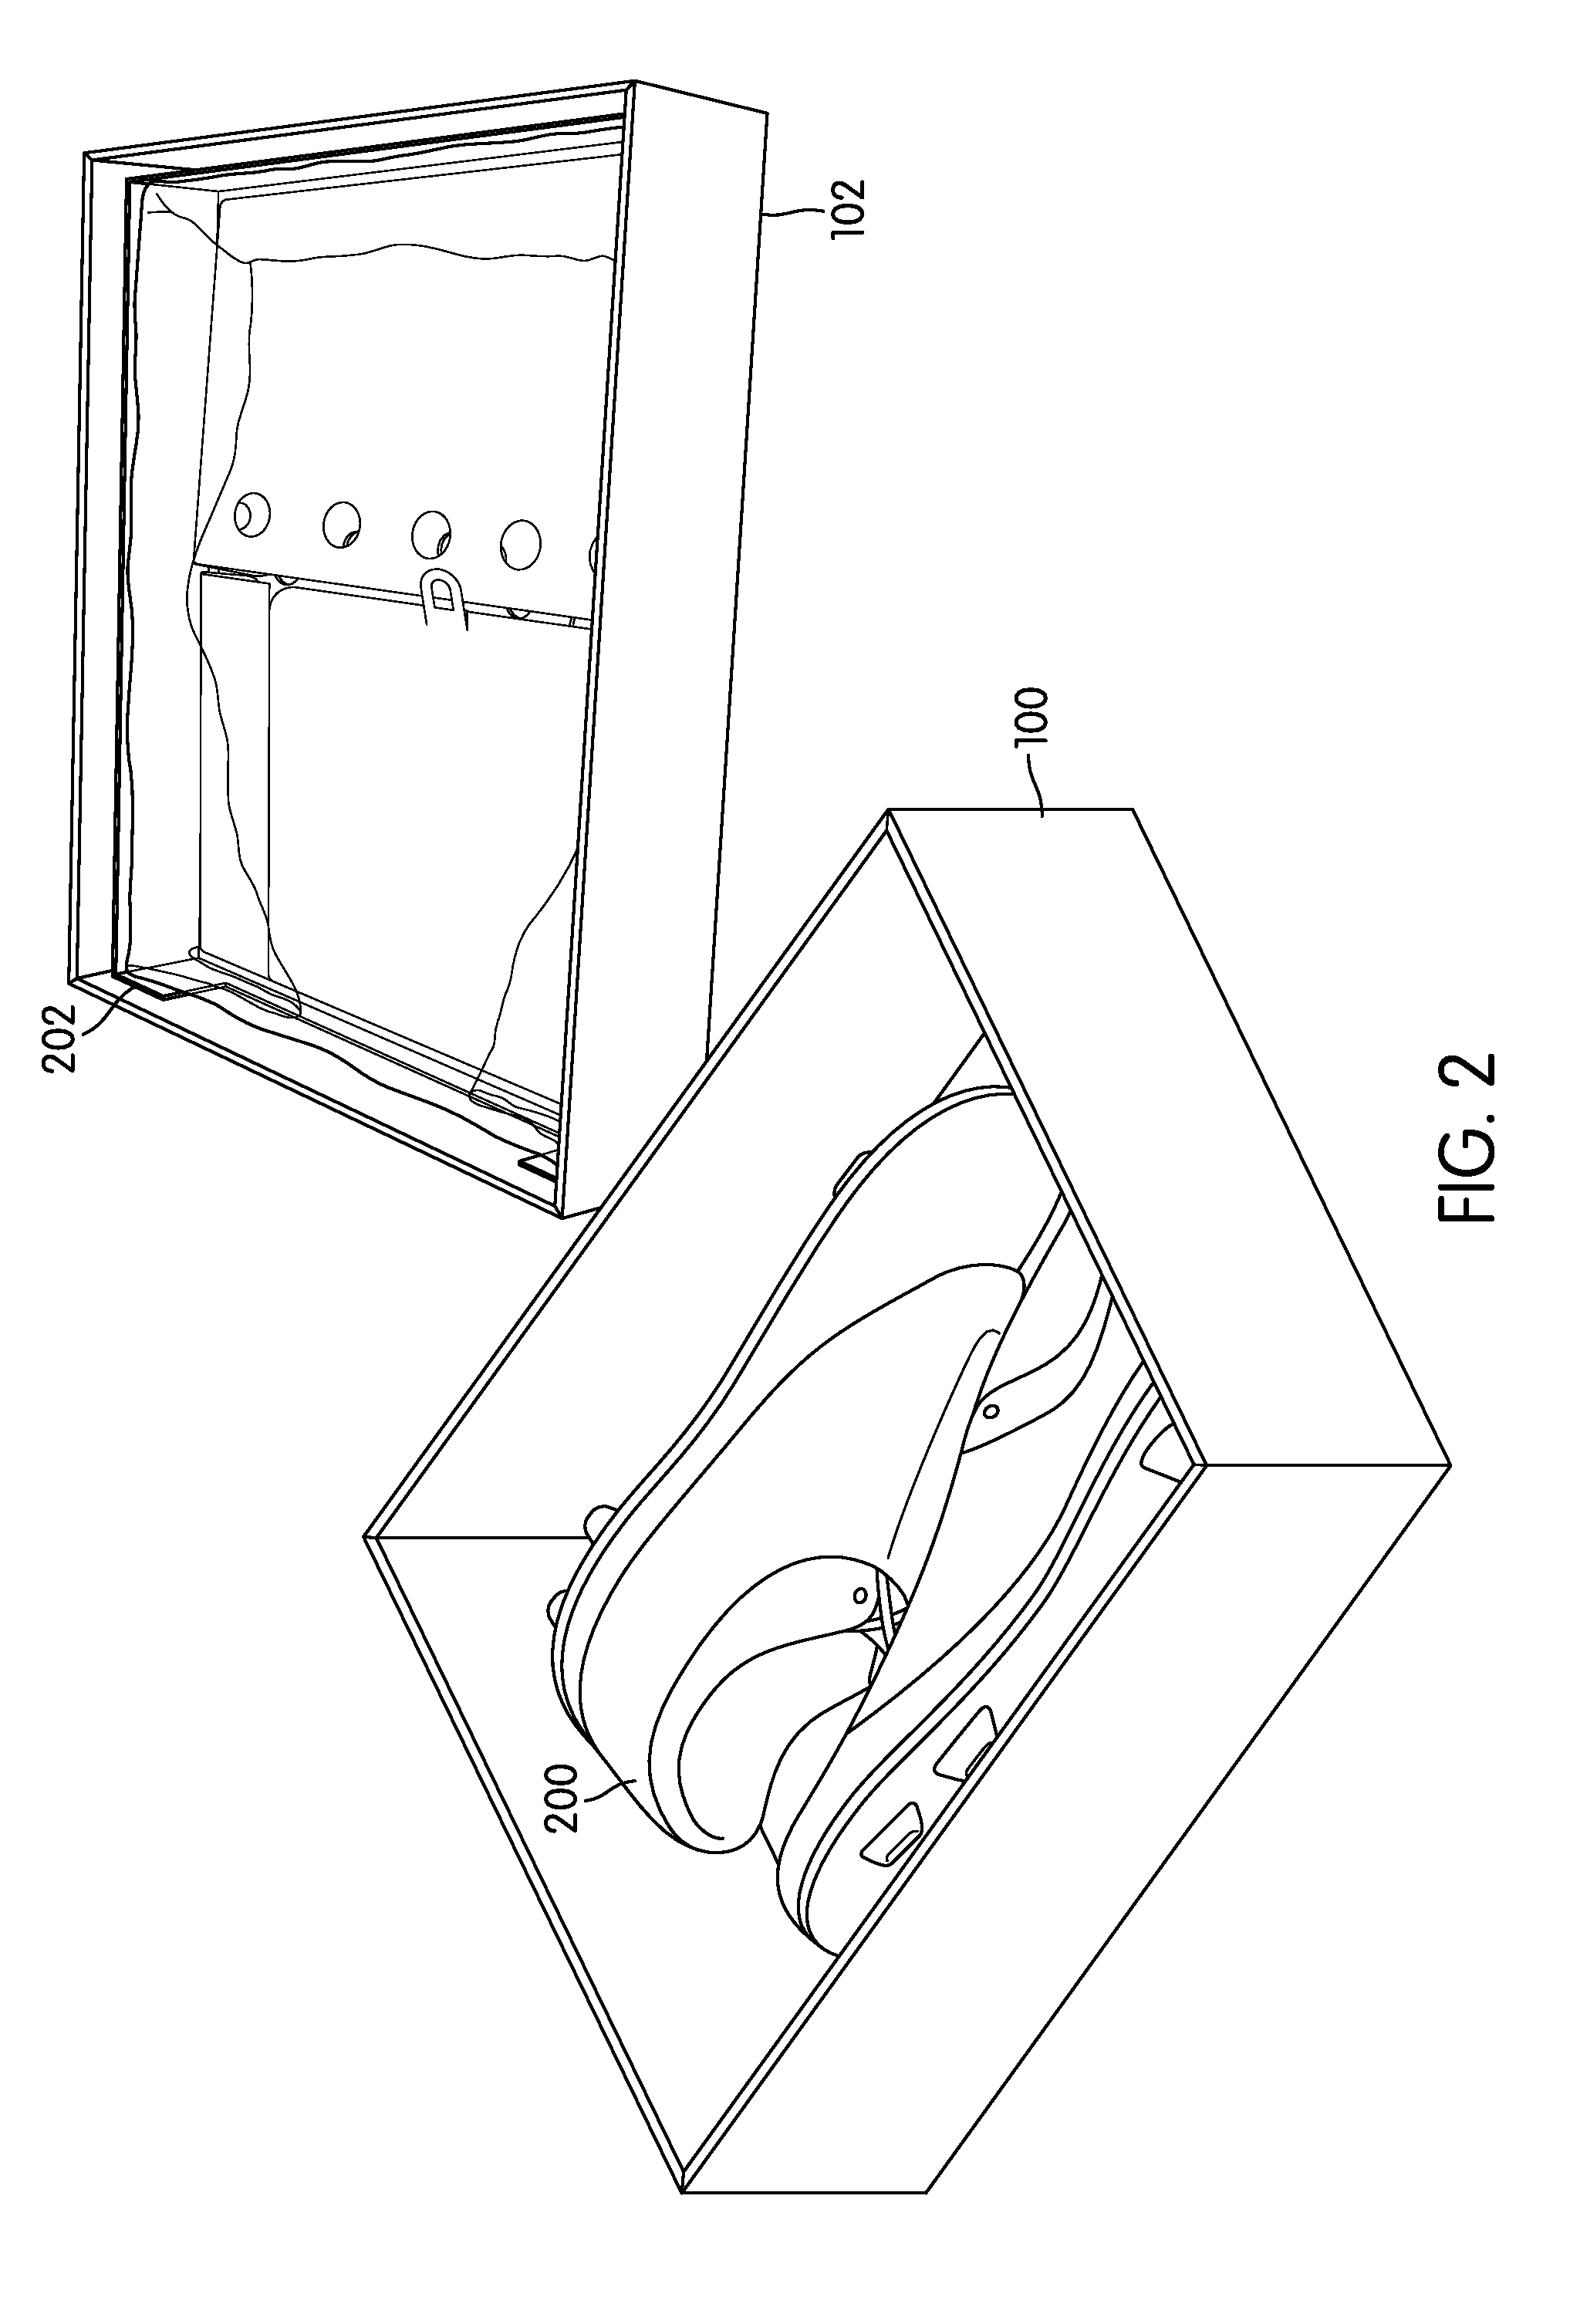 Method of custom fitting an article of footwear and apparatus including a container